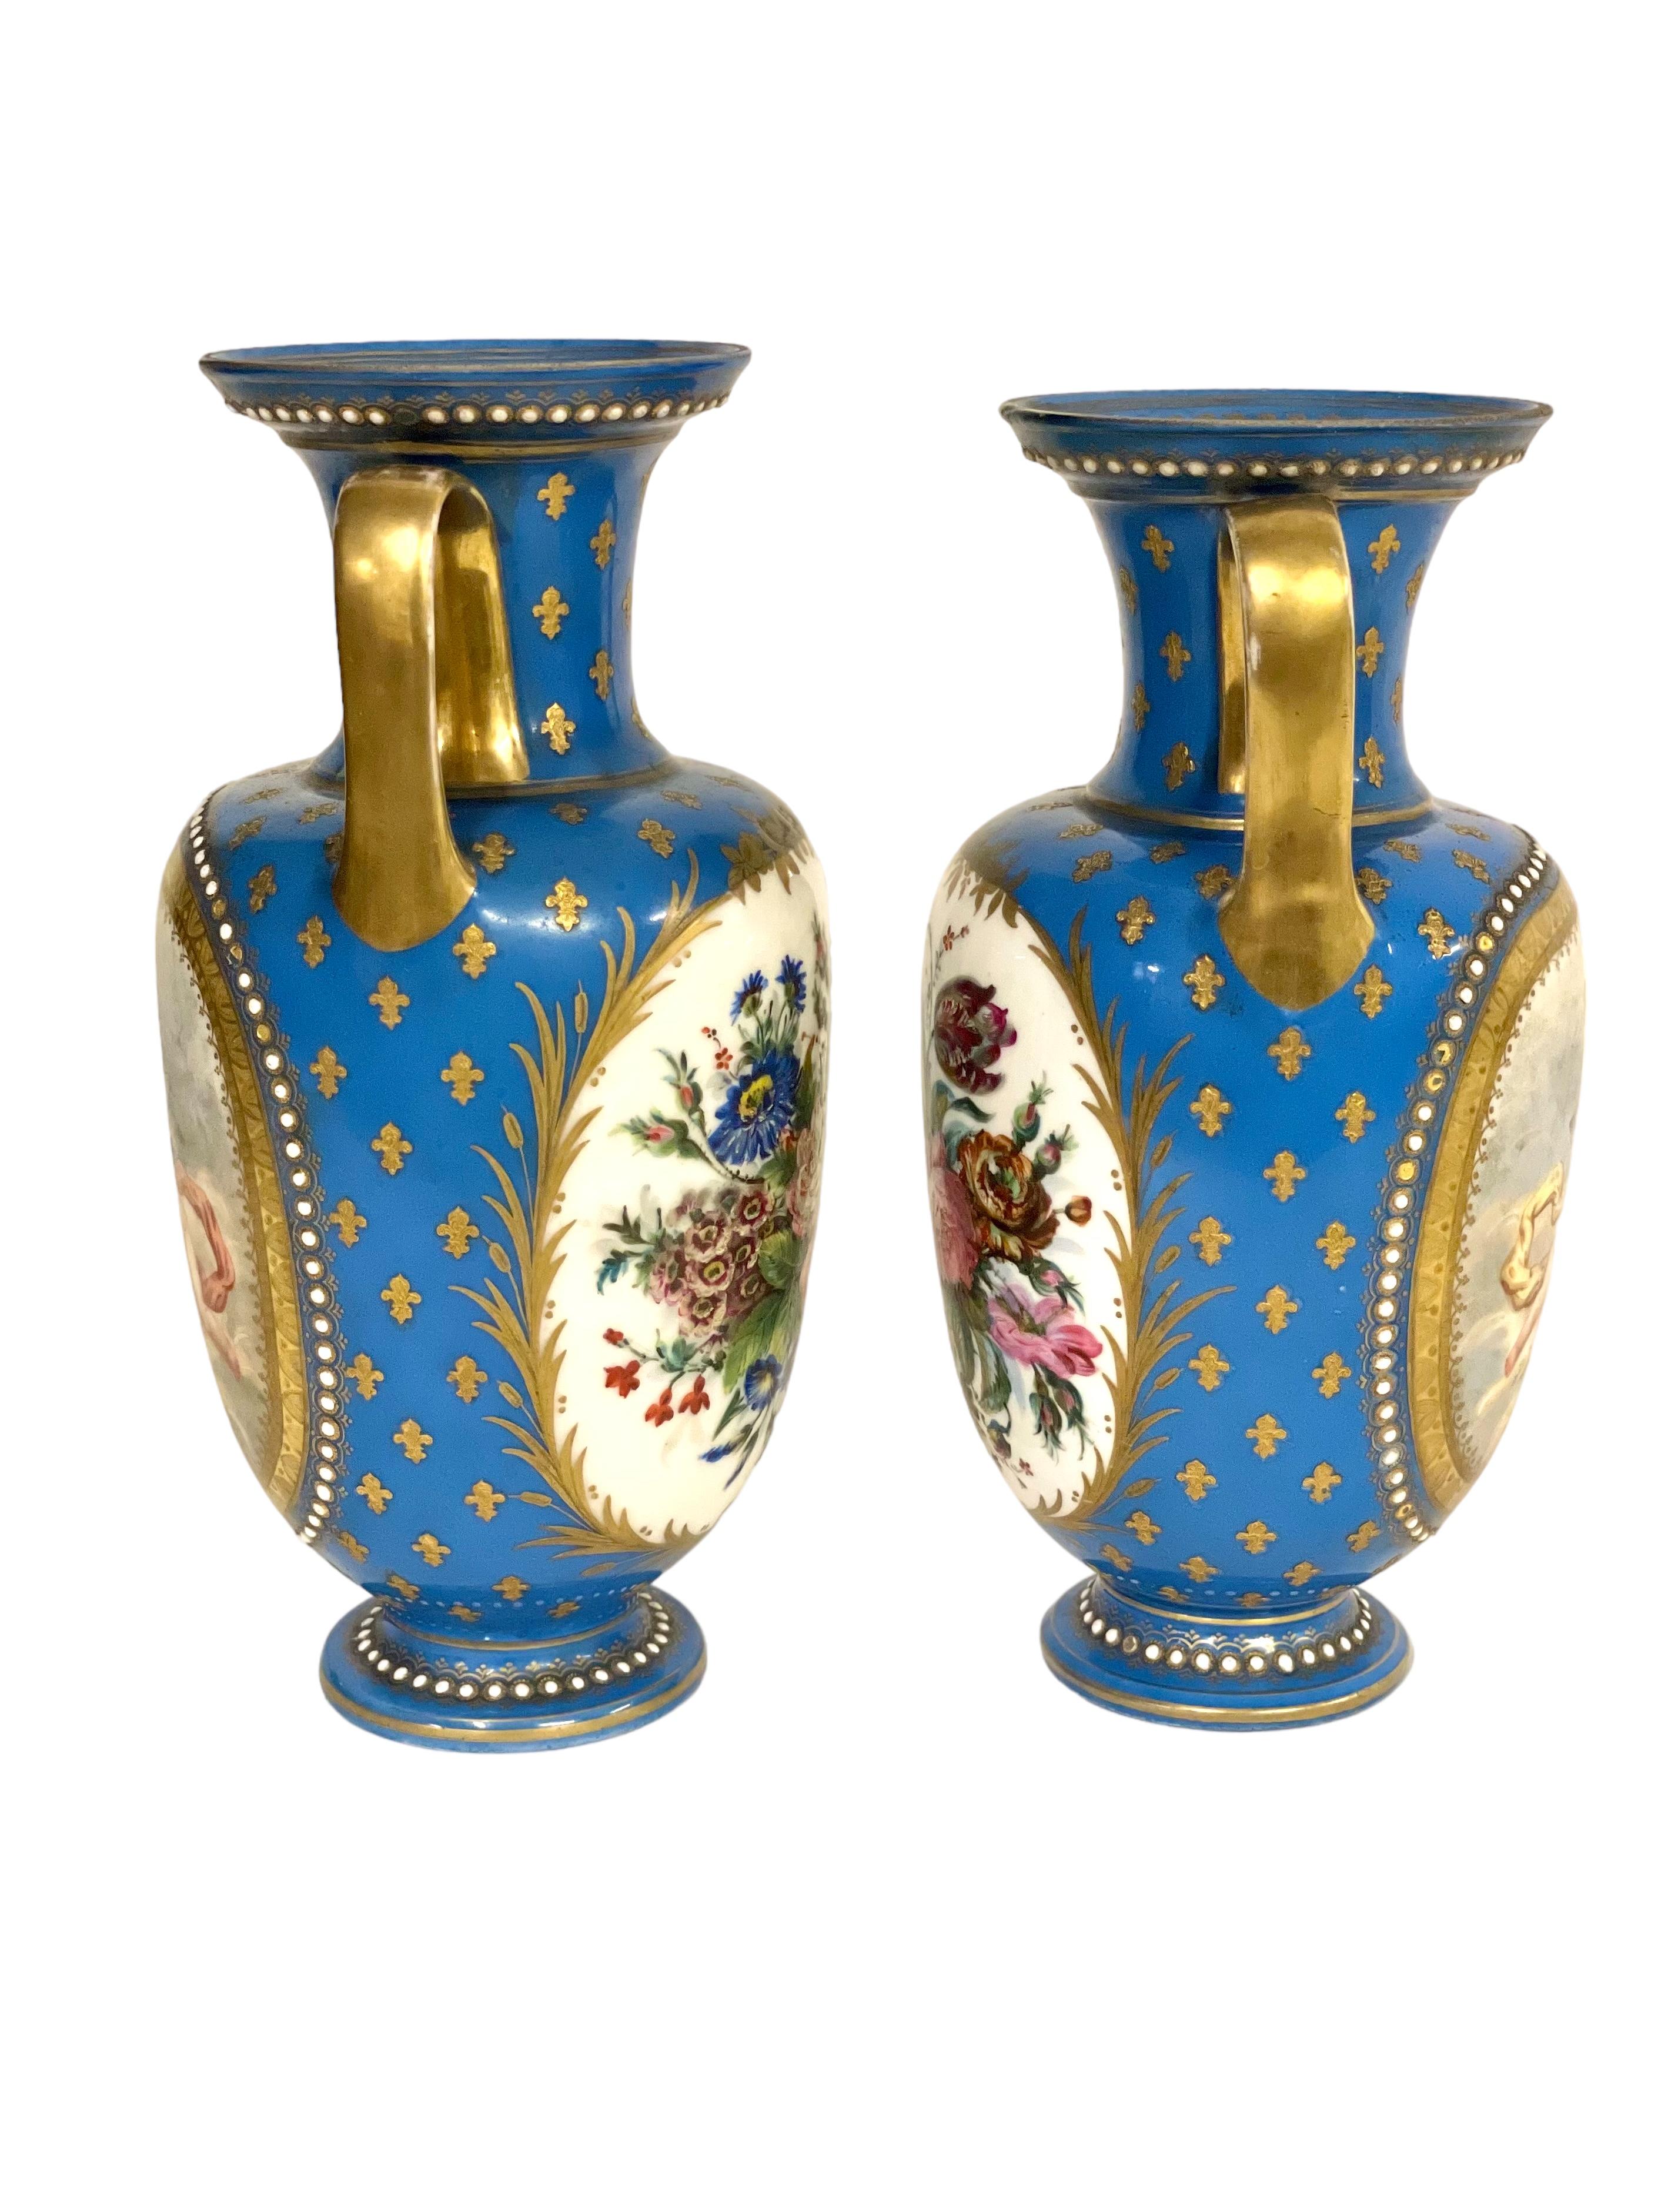 Hand-Painted Sèvres Pair of Gilded and Blue Porcelain Vases, 19th Century